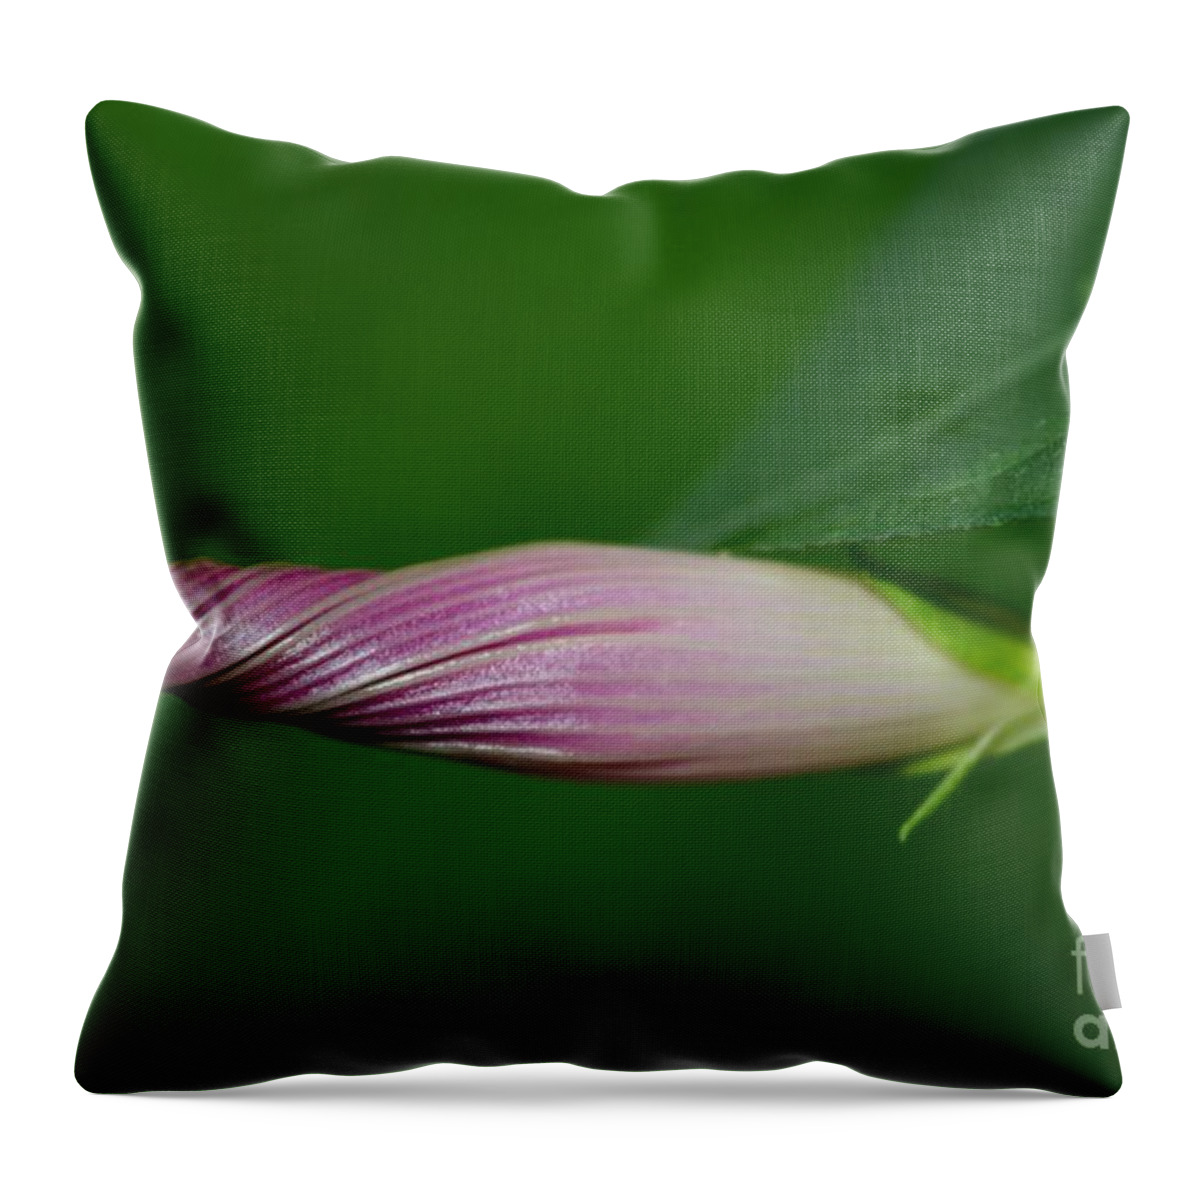 Morning Glory Throw Pillow featuring the photograph All Wound Up by Dani McEvoy